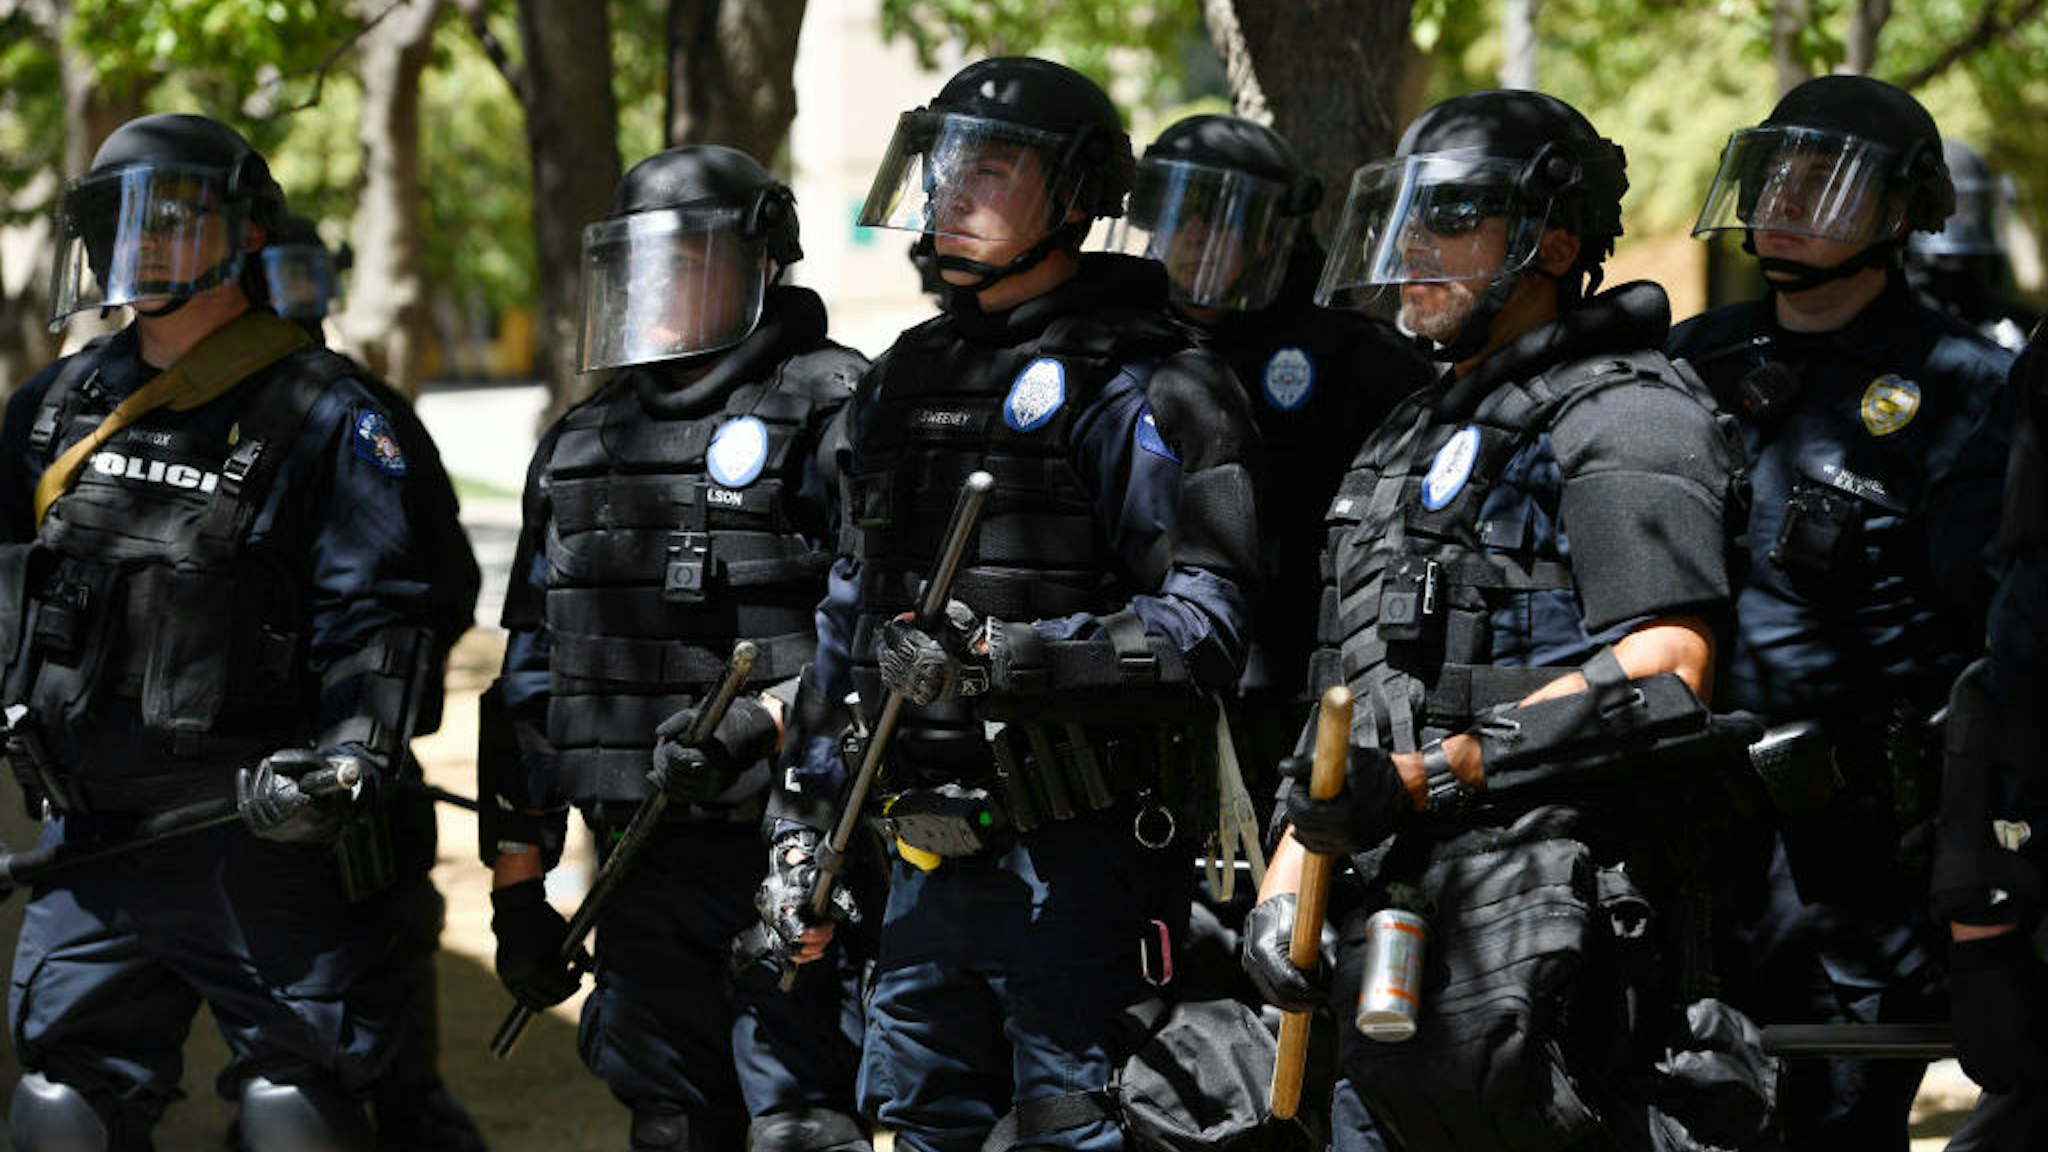 AURORA, CO - JUNE 27: Aurora police in full riot gear at the ready behind a police fence during a Elijah McClain protest in front of the Aurora Police department's headquarters at the Aurora Municipal Center June 27, 2020. Elijah McClain died August 30, 2019 several days after a struggle with Aurora police. Elijah became unconscious during the encounter with police August 24, 2019 and had a heart attack while being transported to a hospital. McClain died after being taken off life support. (Photo by Andy Cross/The Denver Post)